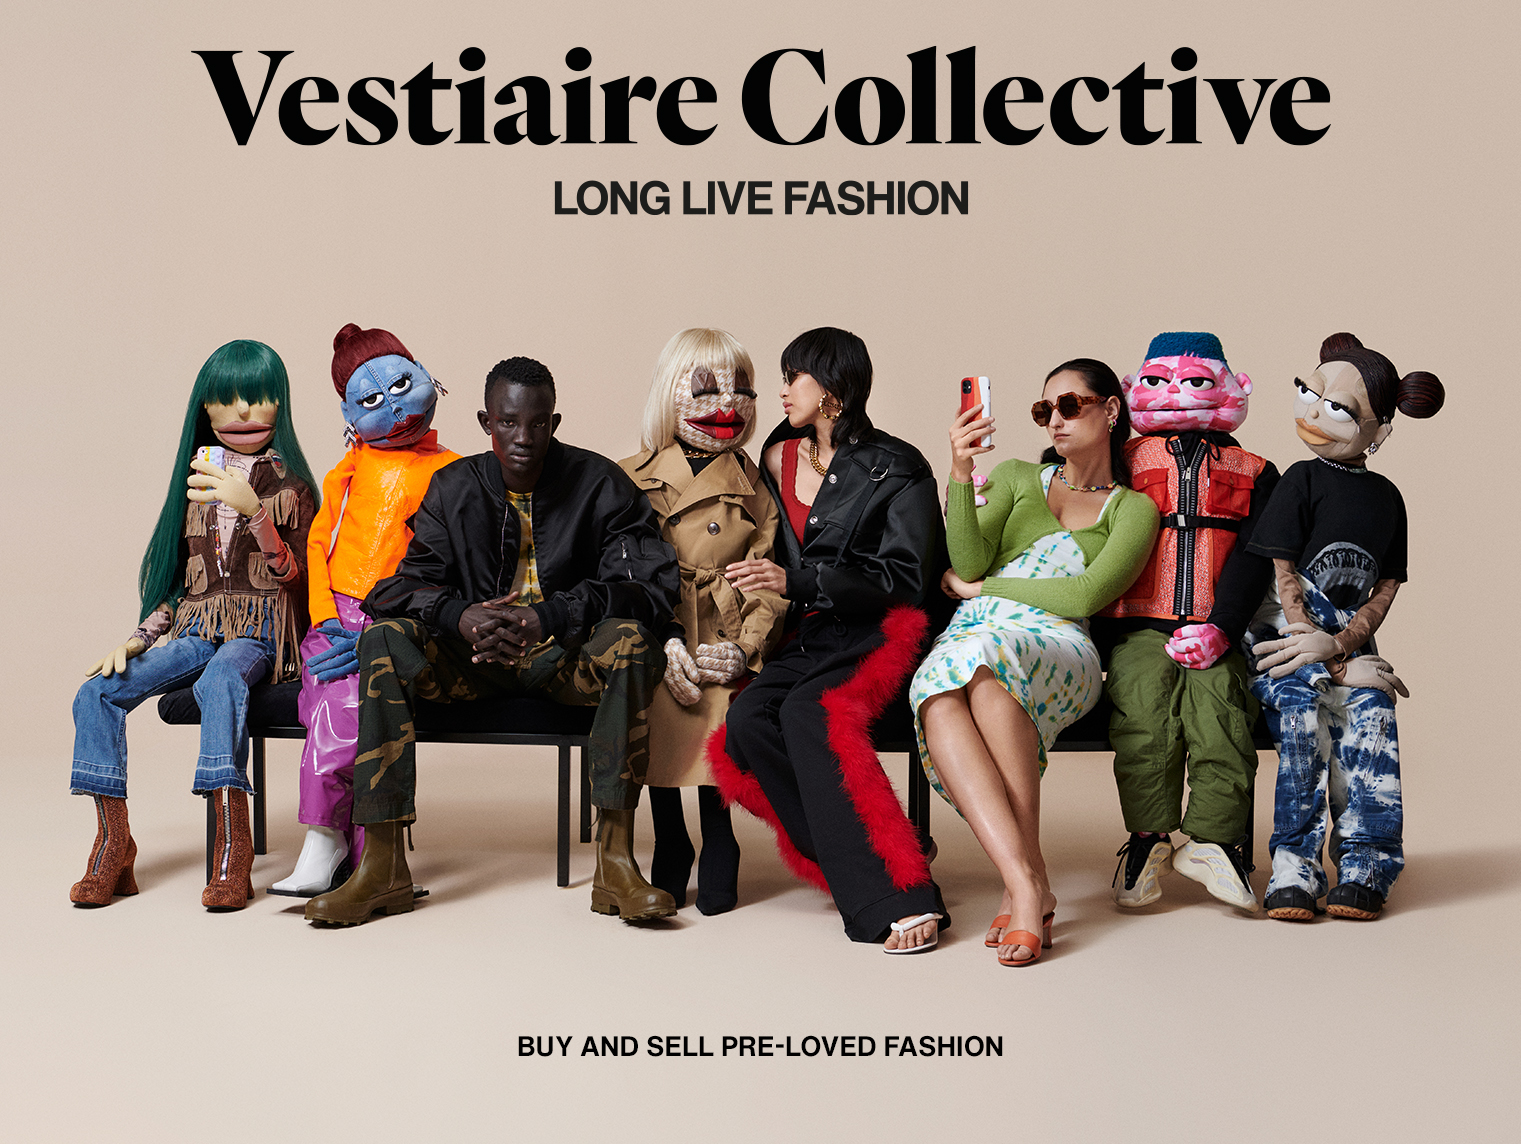 Vestiaire Collective relaunches with a daring new look at future-friendly fashion.